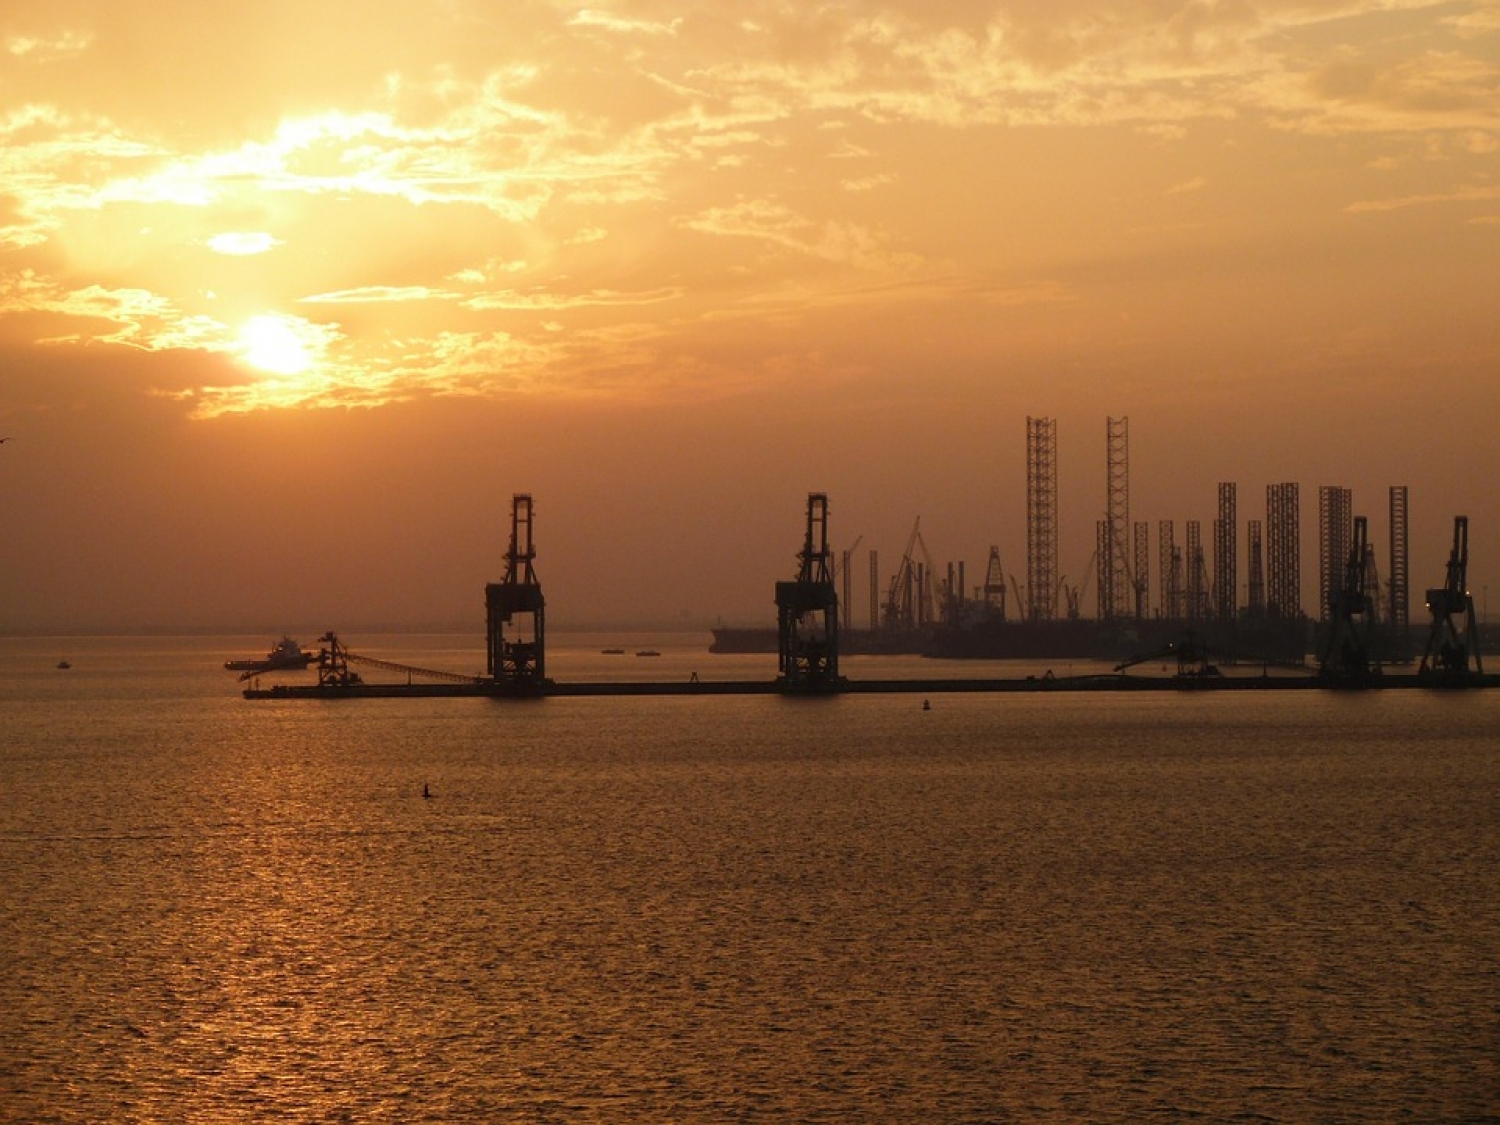 Bahrain’s non-oil economy ‘on strong growth track’